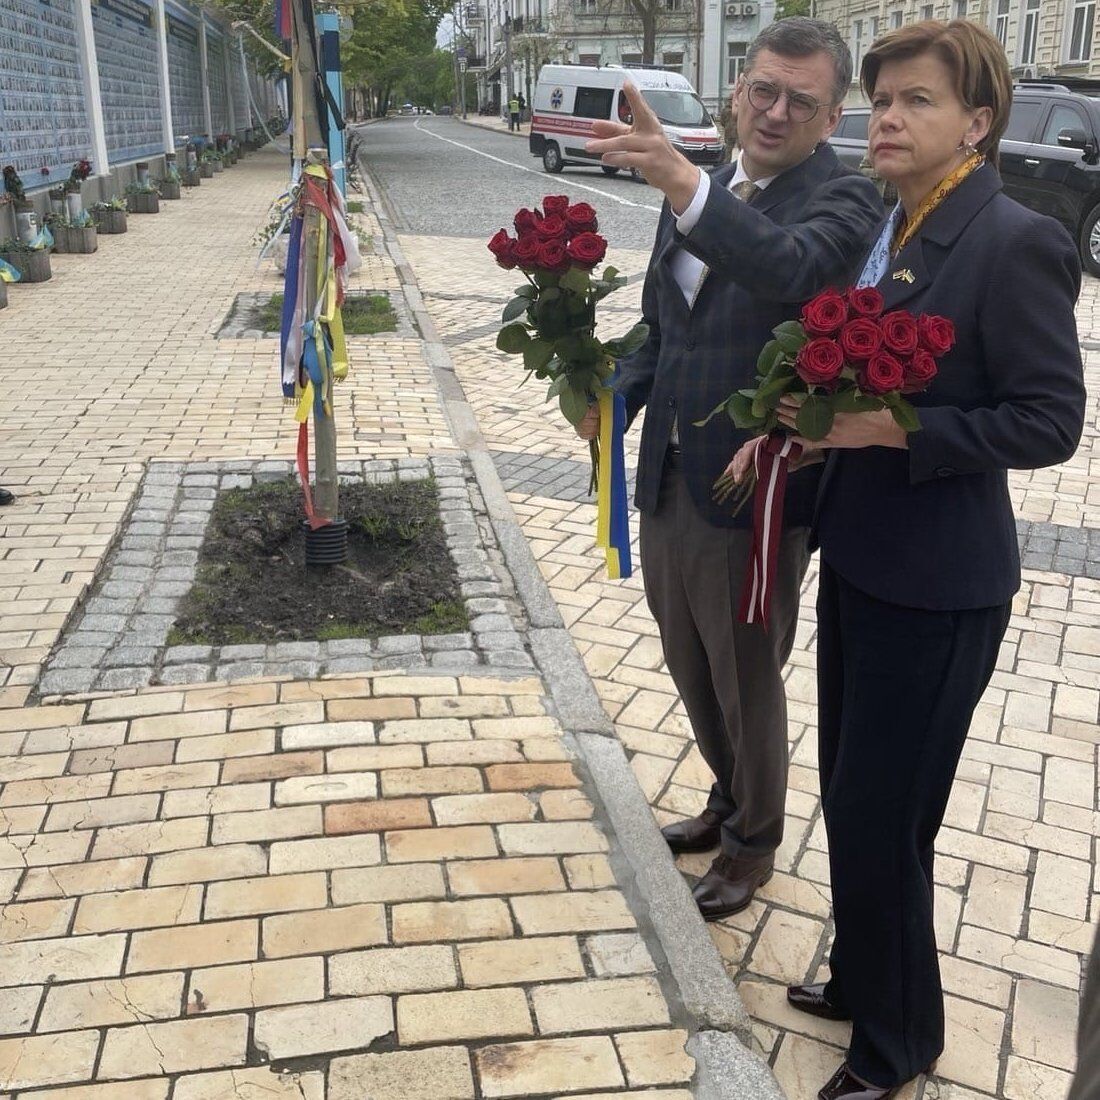 The new head of the Latvian Foreign Ministry arrived in Kyiv on a visit and paid tribute to those killed in the war with Russia. Photo